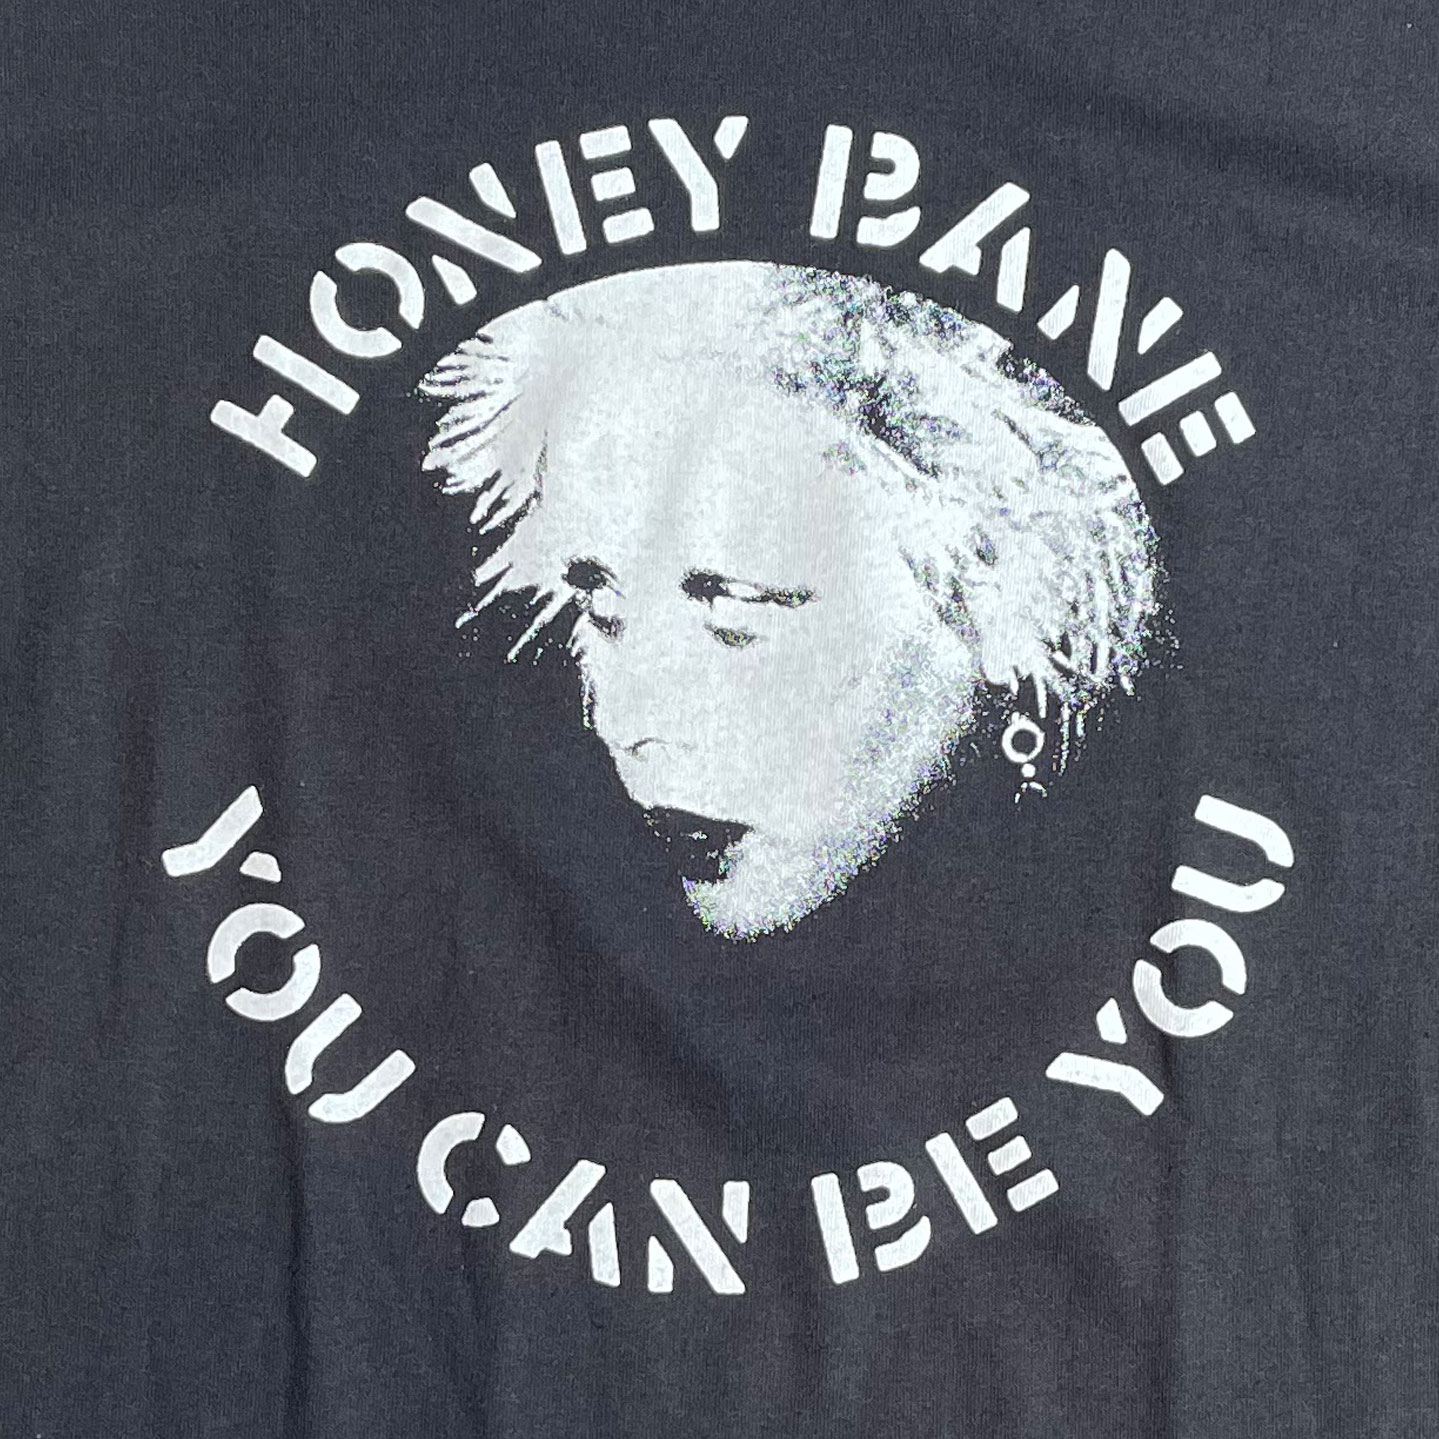 HONEY BANE  Tシャツ YOU CAN BE YOU